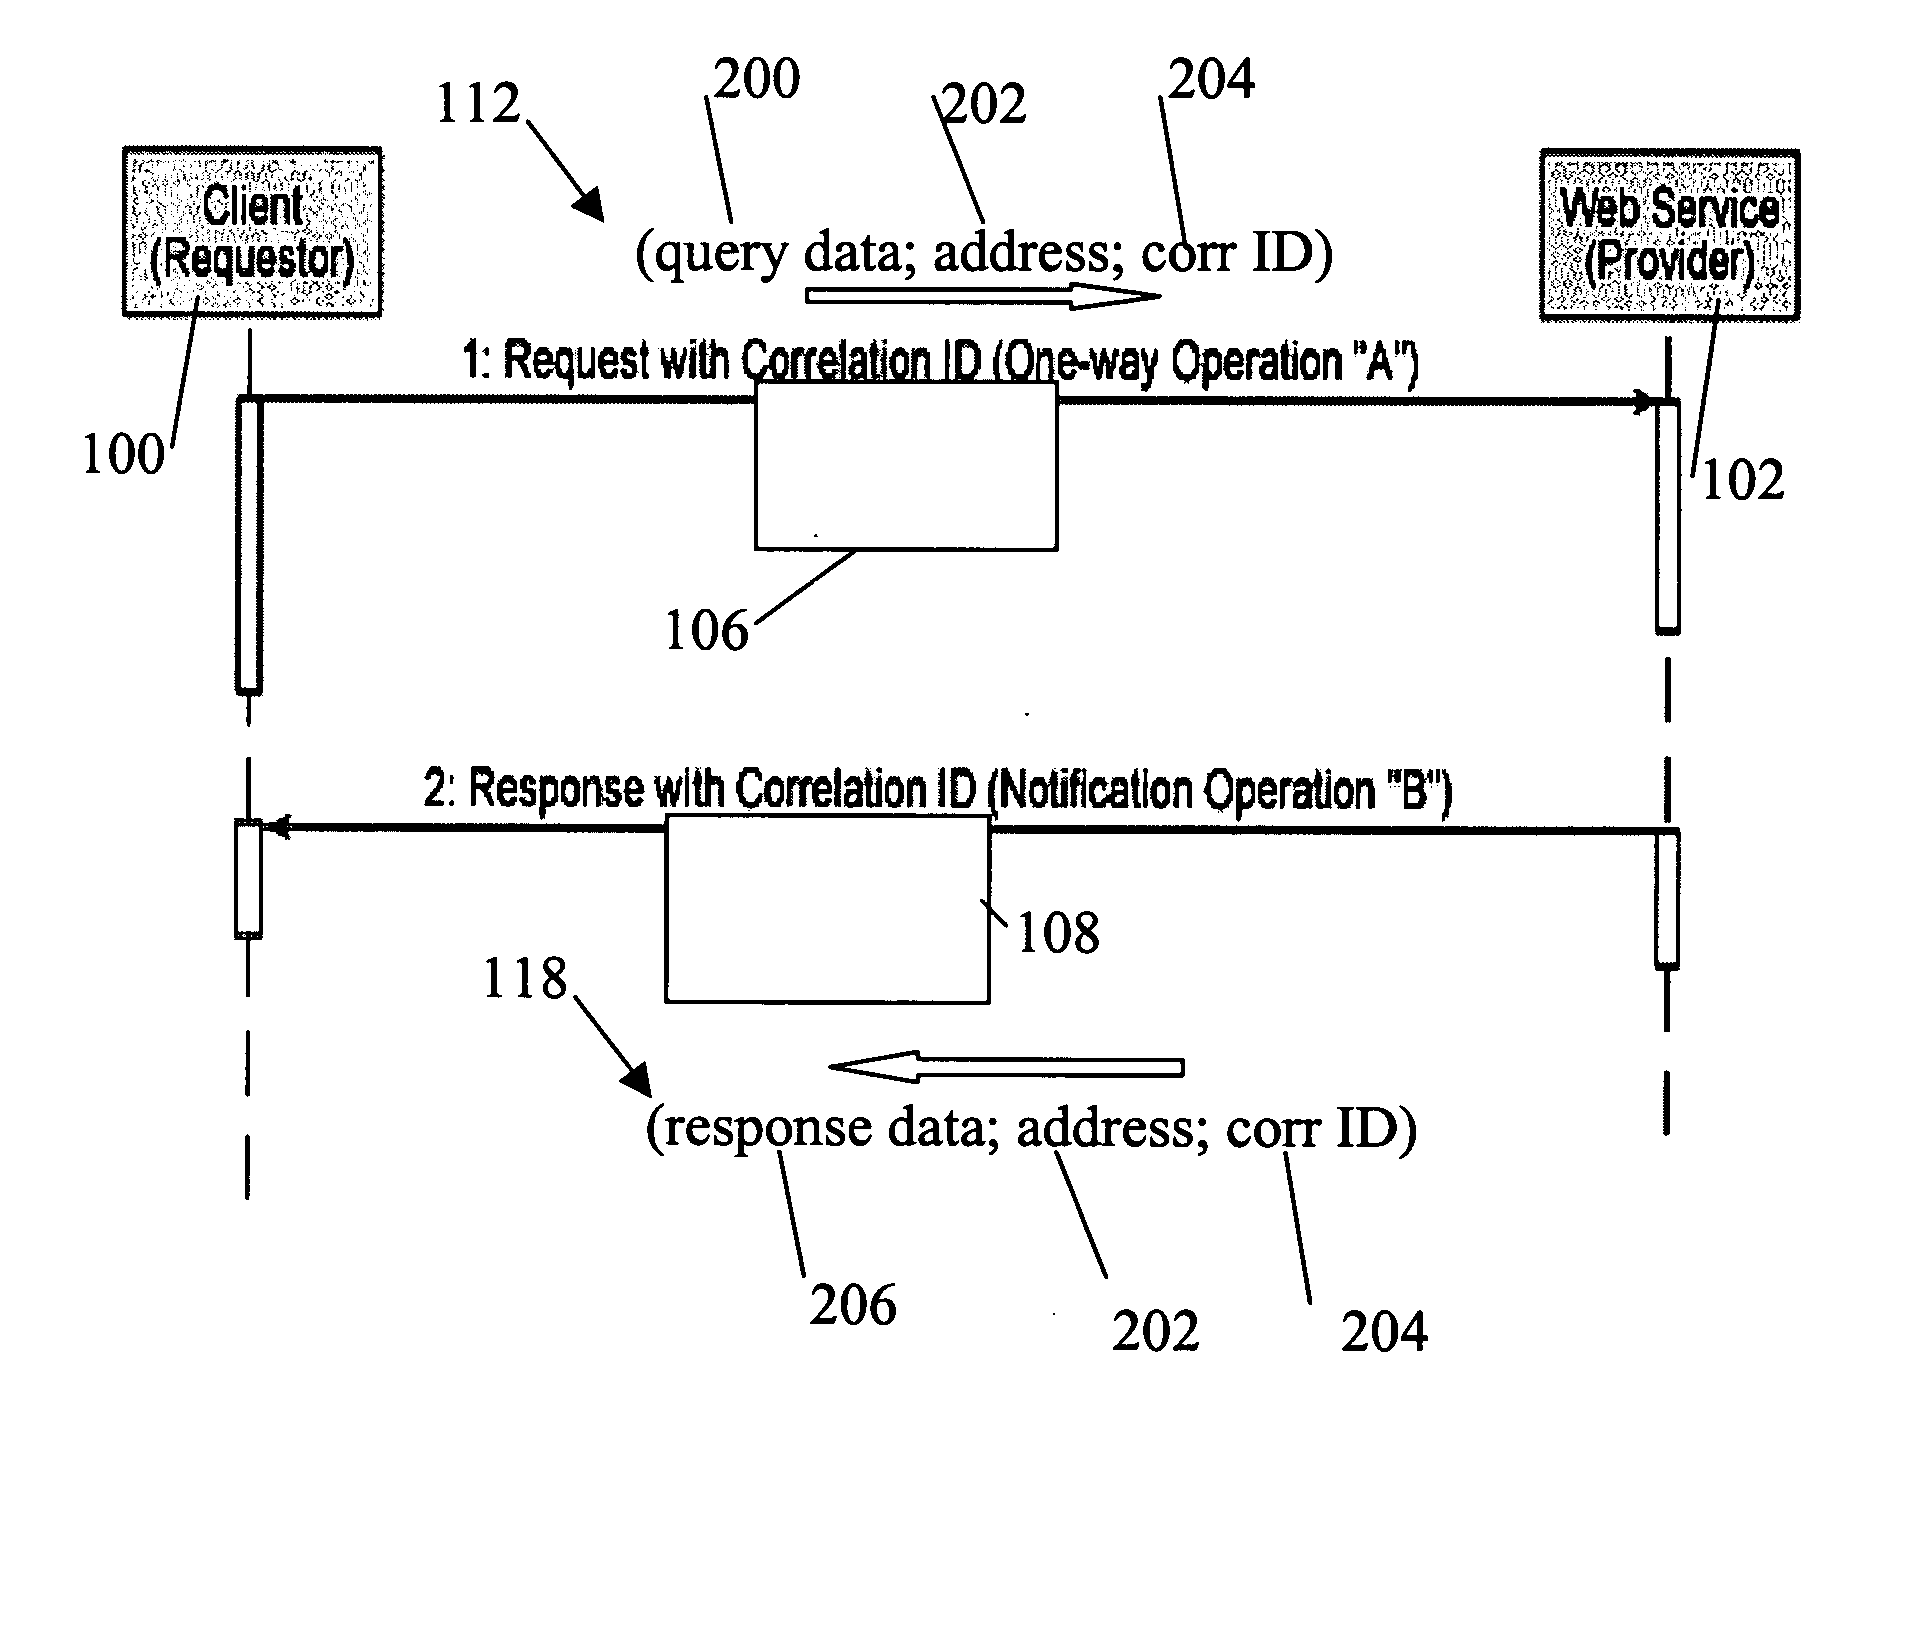 System and method for asynchronous wireless services using reverse service schema generation